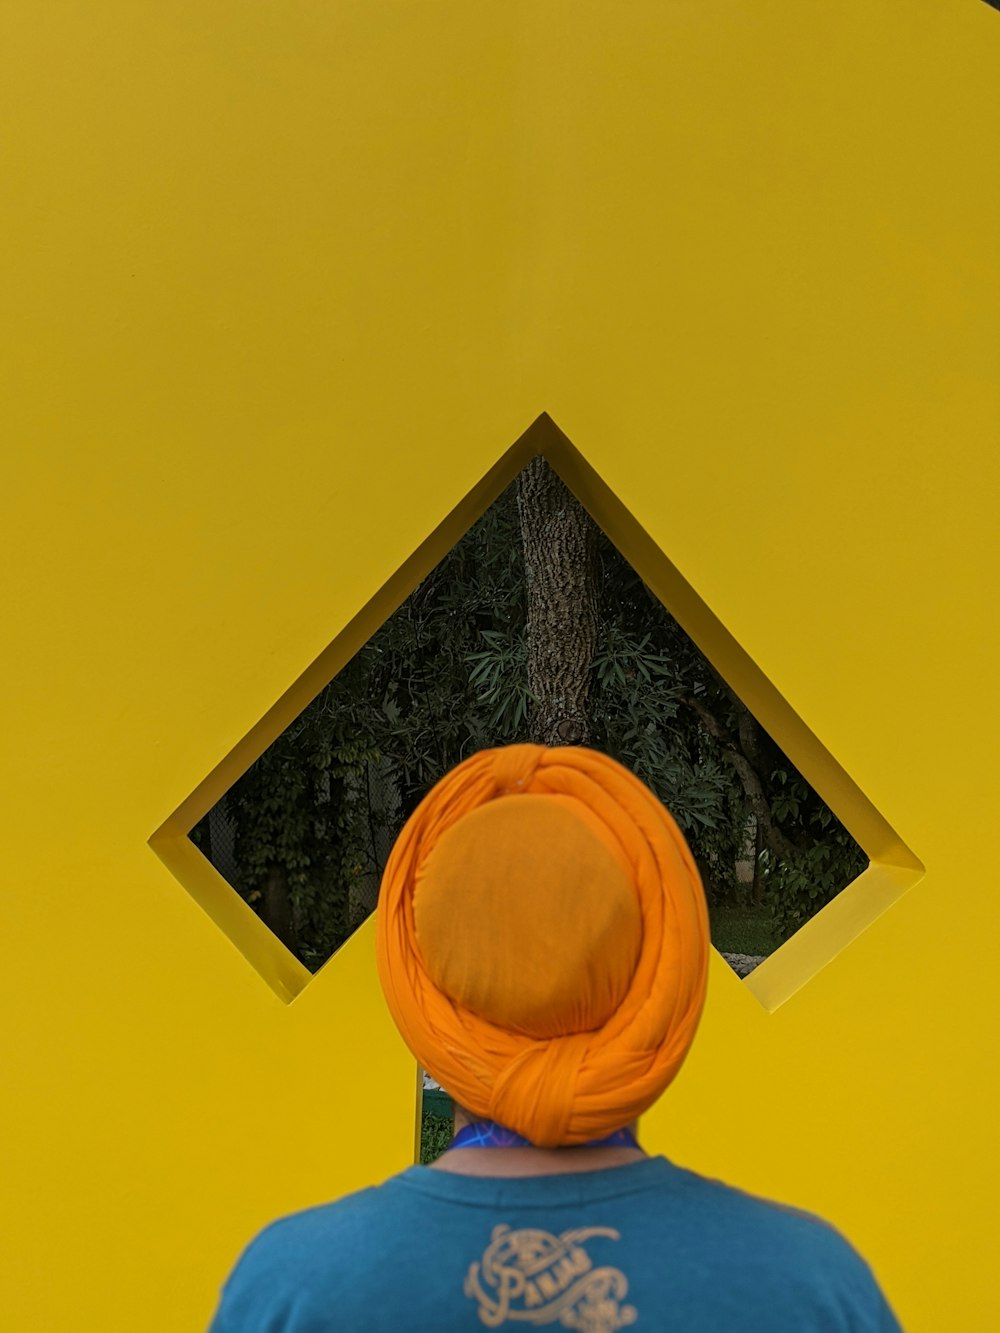 person wearing blue and brown shirt and orange turban hat standing while facing back